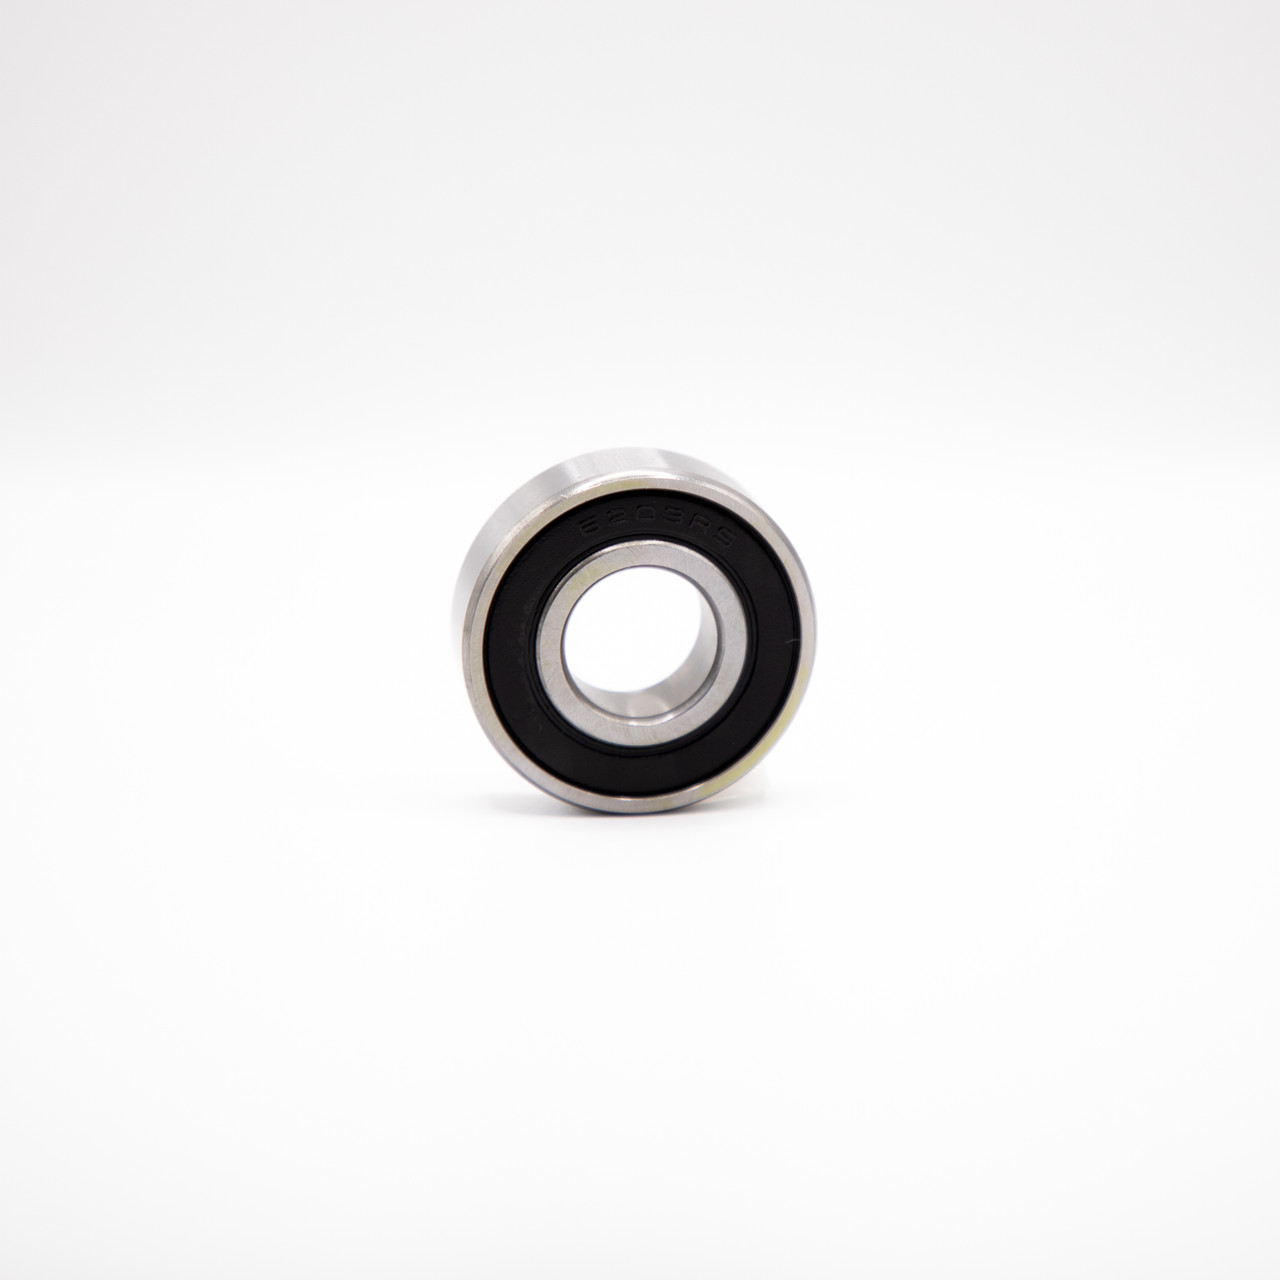 R4A-2RS Miniature Ball Bearing 1/4x3/4x9/32 Front View